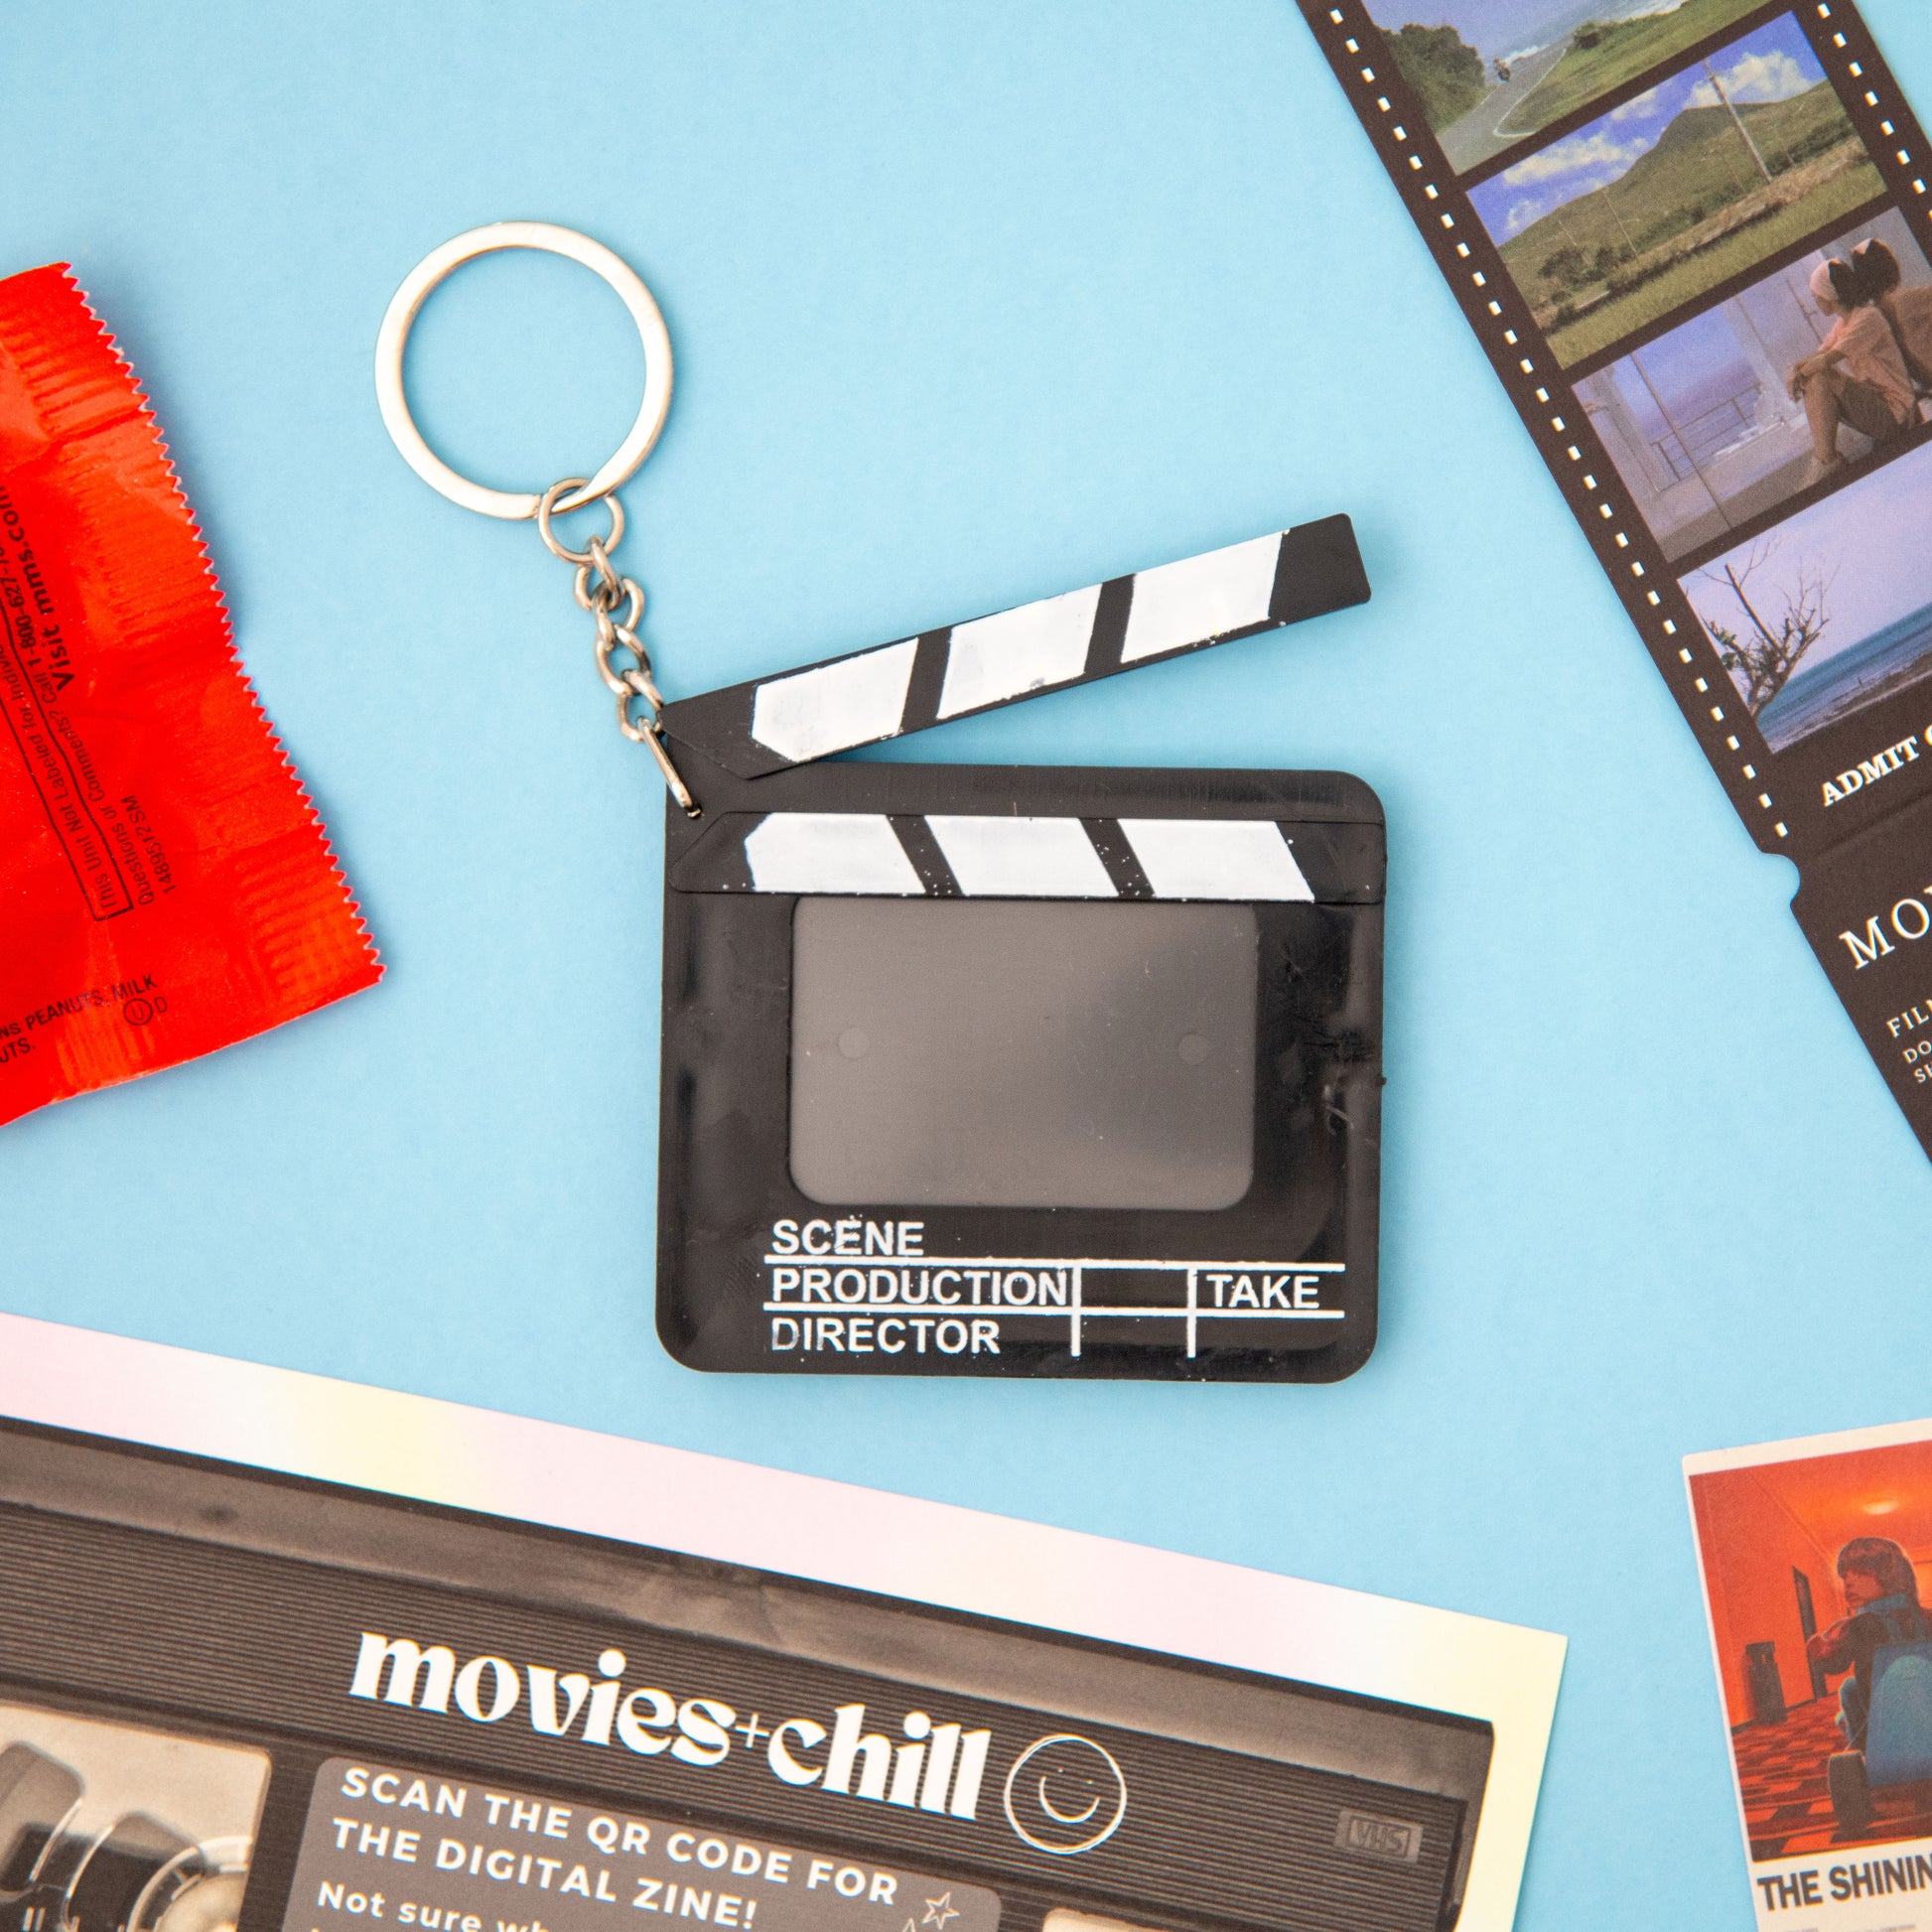 A must-have for movie fans! This directors clapboard keychain is the perfect accessory for film enthusiasts. From our movie-themed subscription box, this keychain is a great addition to your collection. Featuring a black and white design with a clapper and movie details, this keychain is perfect for any movie buff. Get yours today and take the first step to becoming a true movie aficionado!